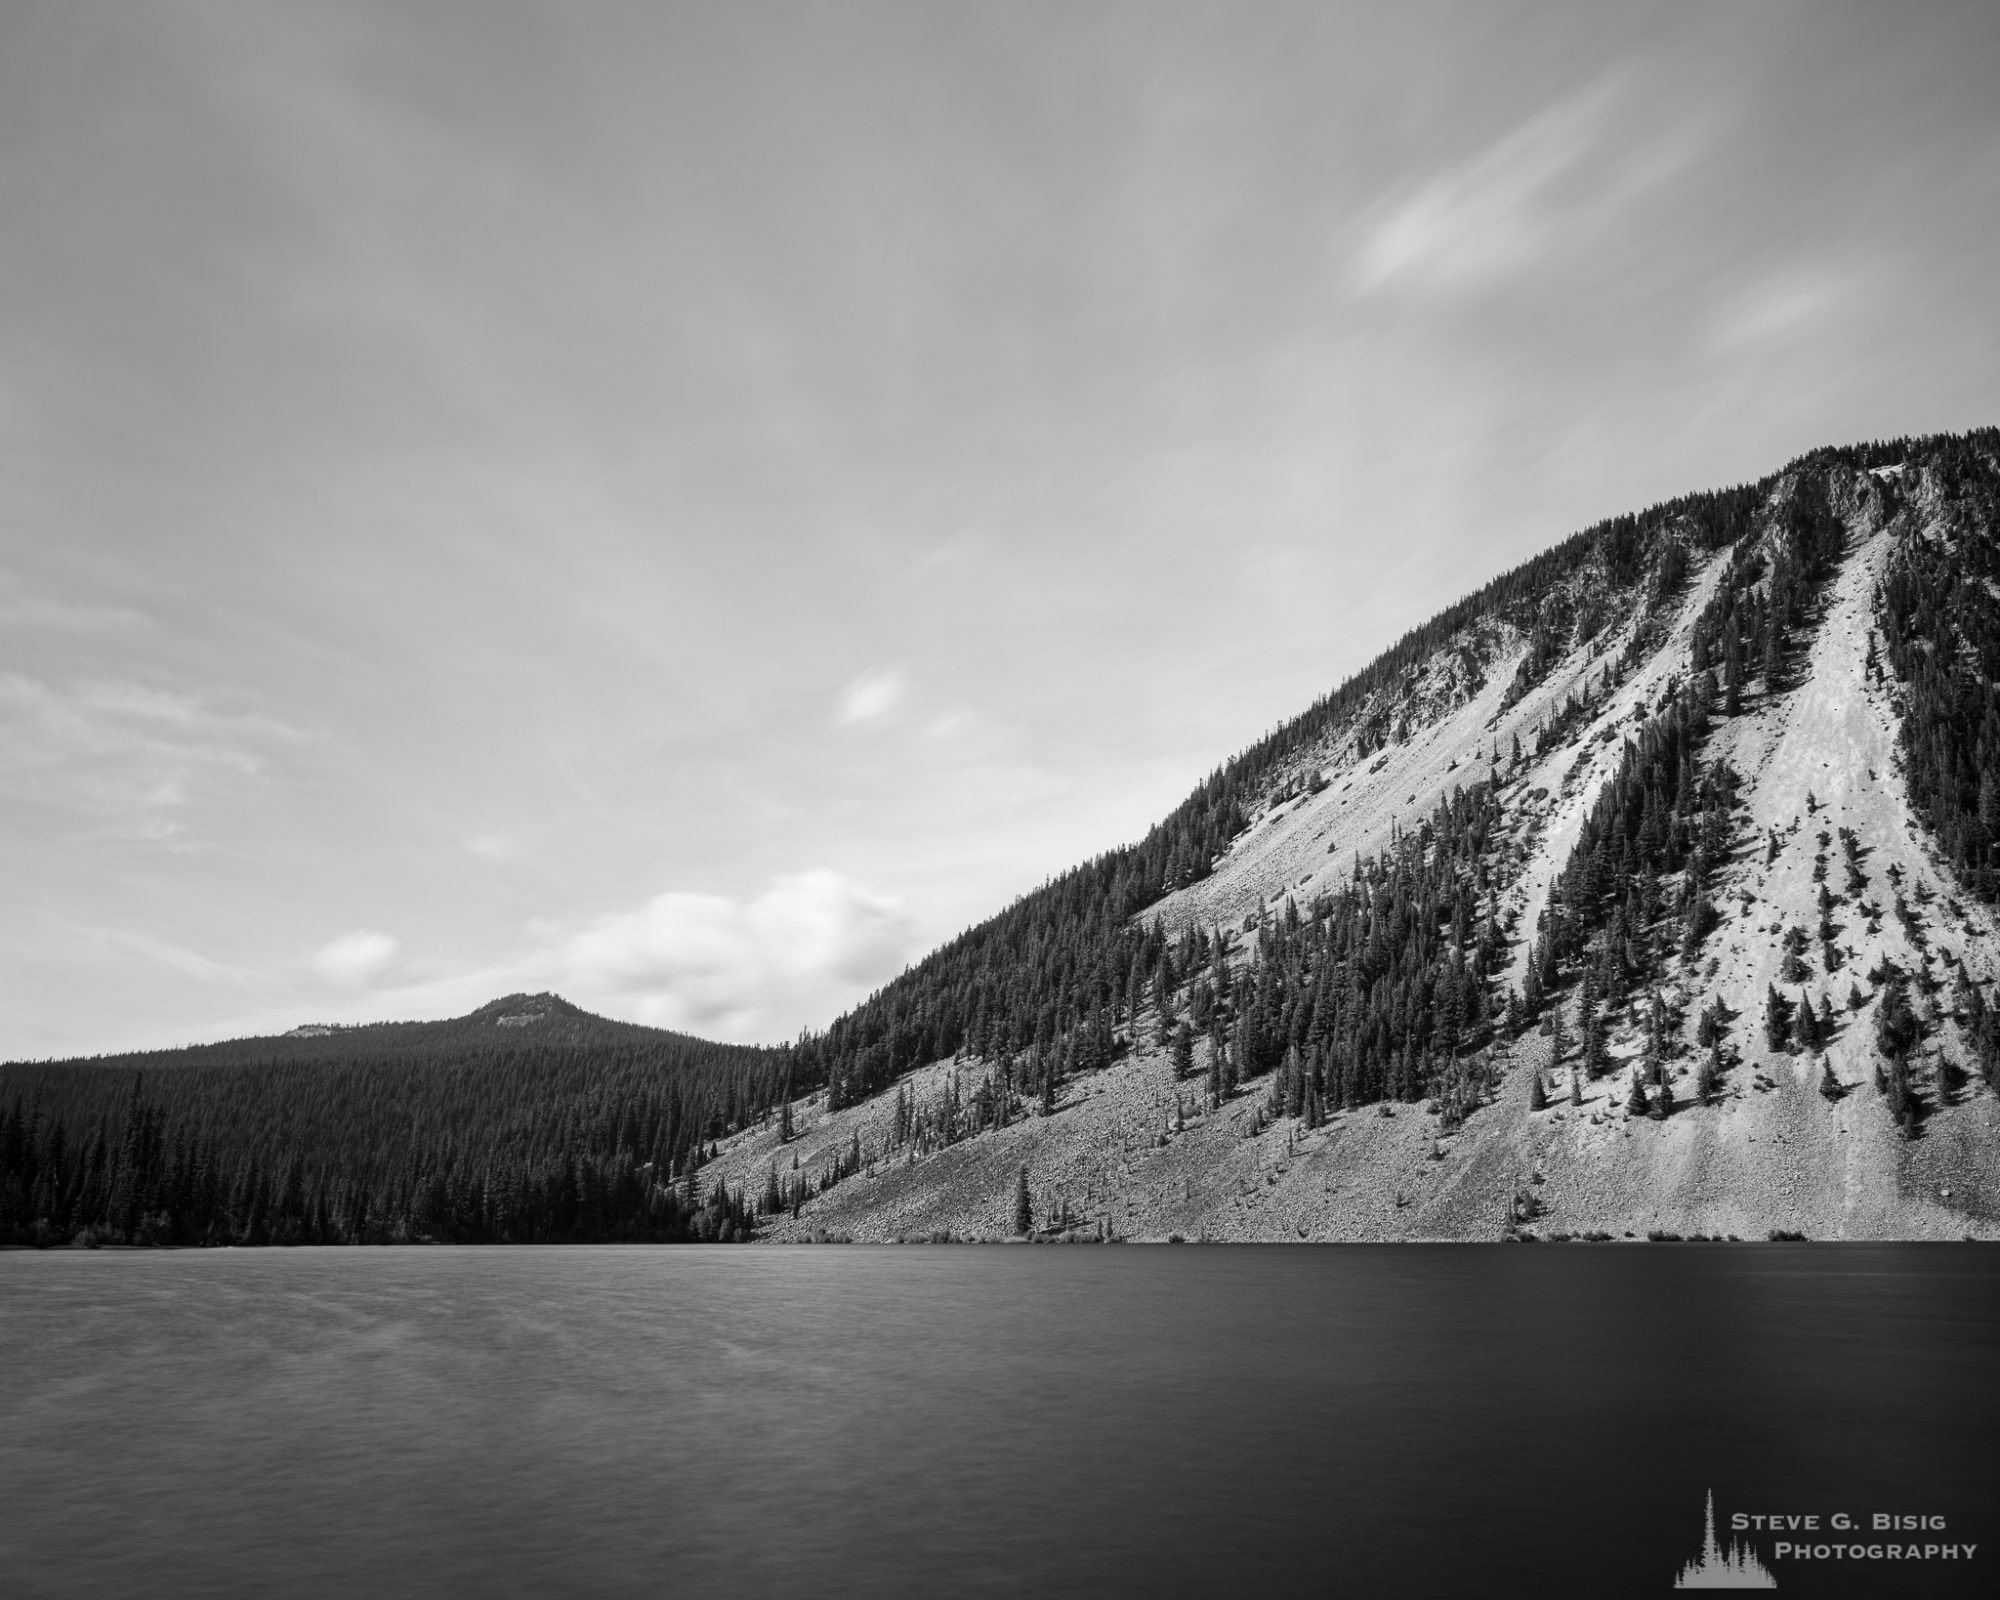 A long exposure black and white landscape photograph of Spiral Butte at Dog Lake near White Pass, Washington.